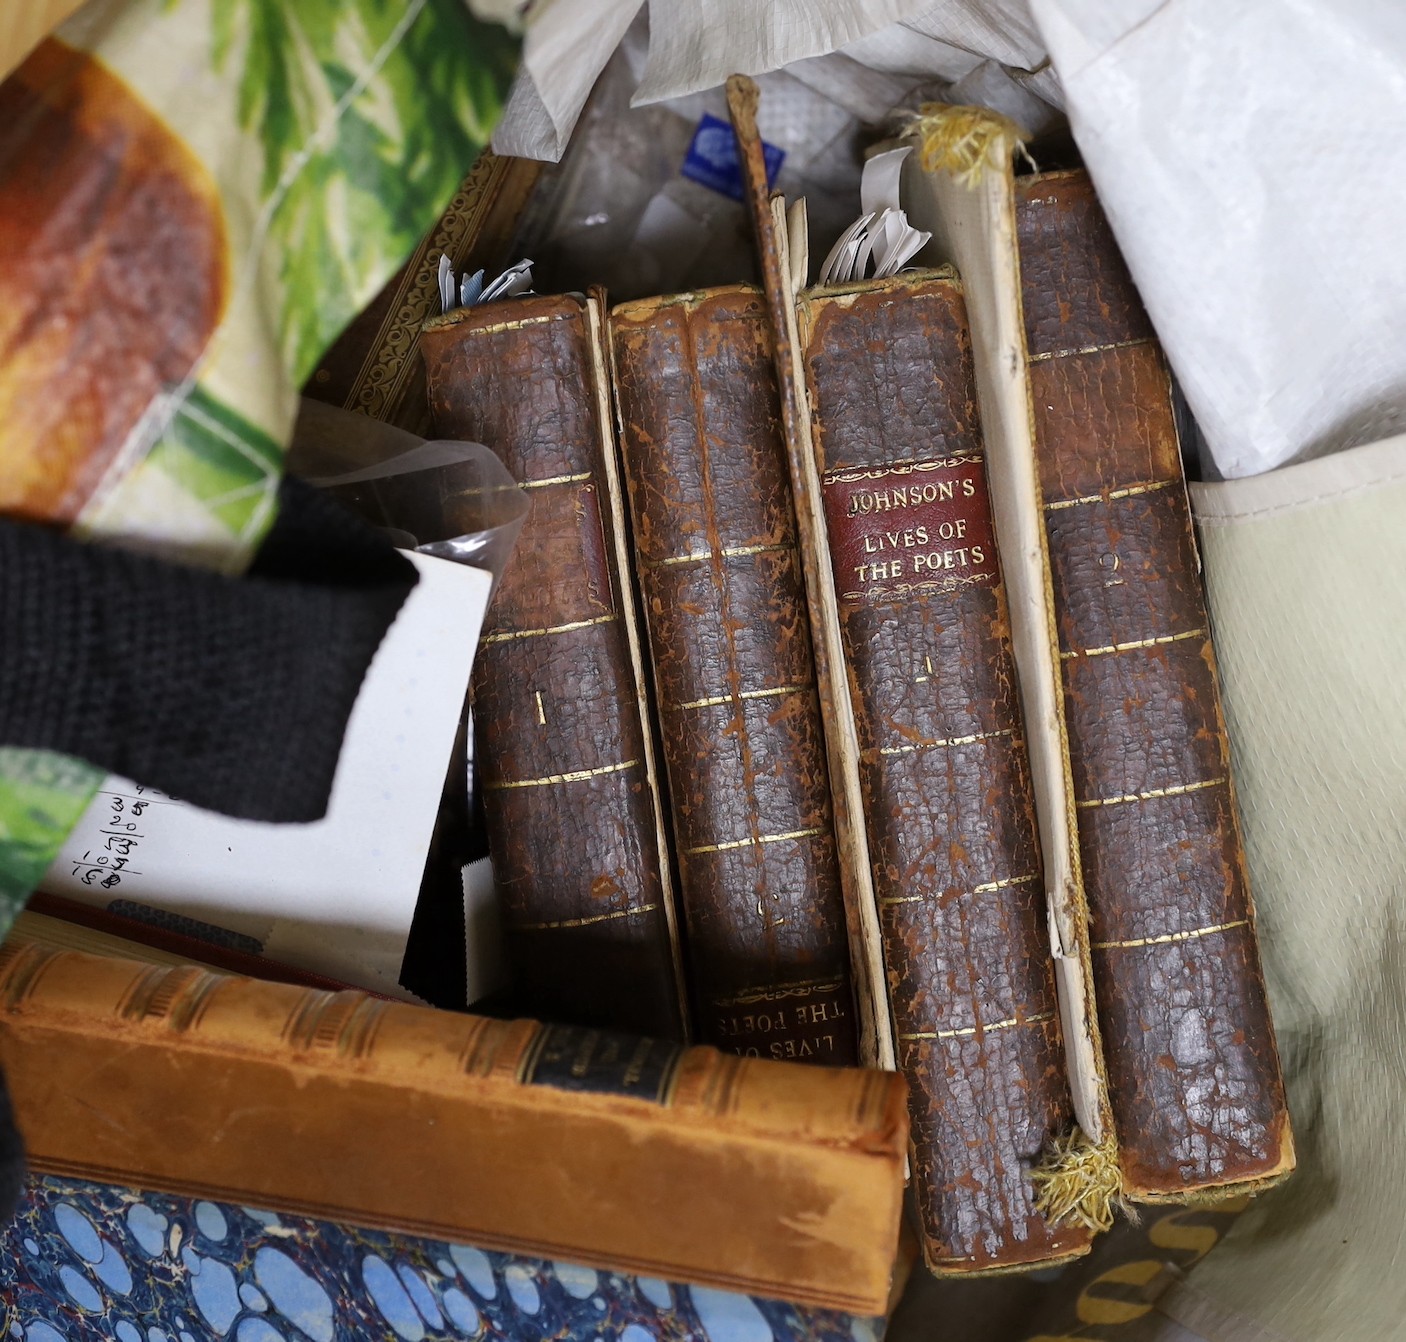 A quantity of various books and bindings including two bibles